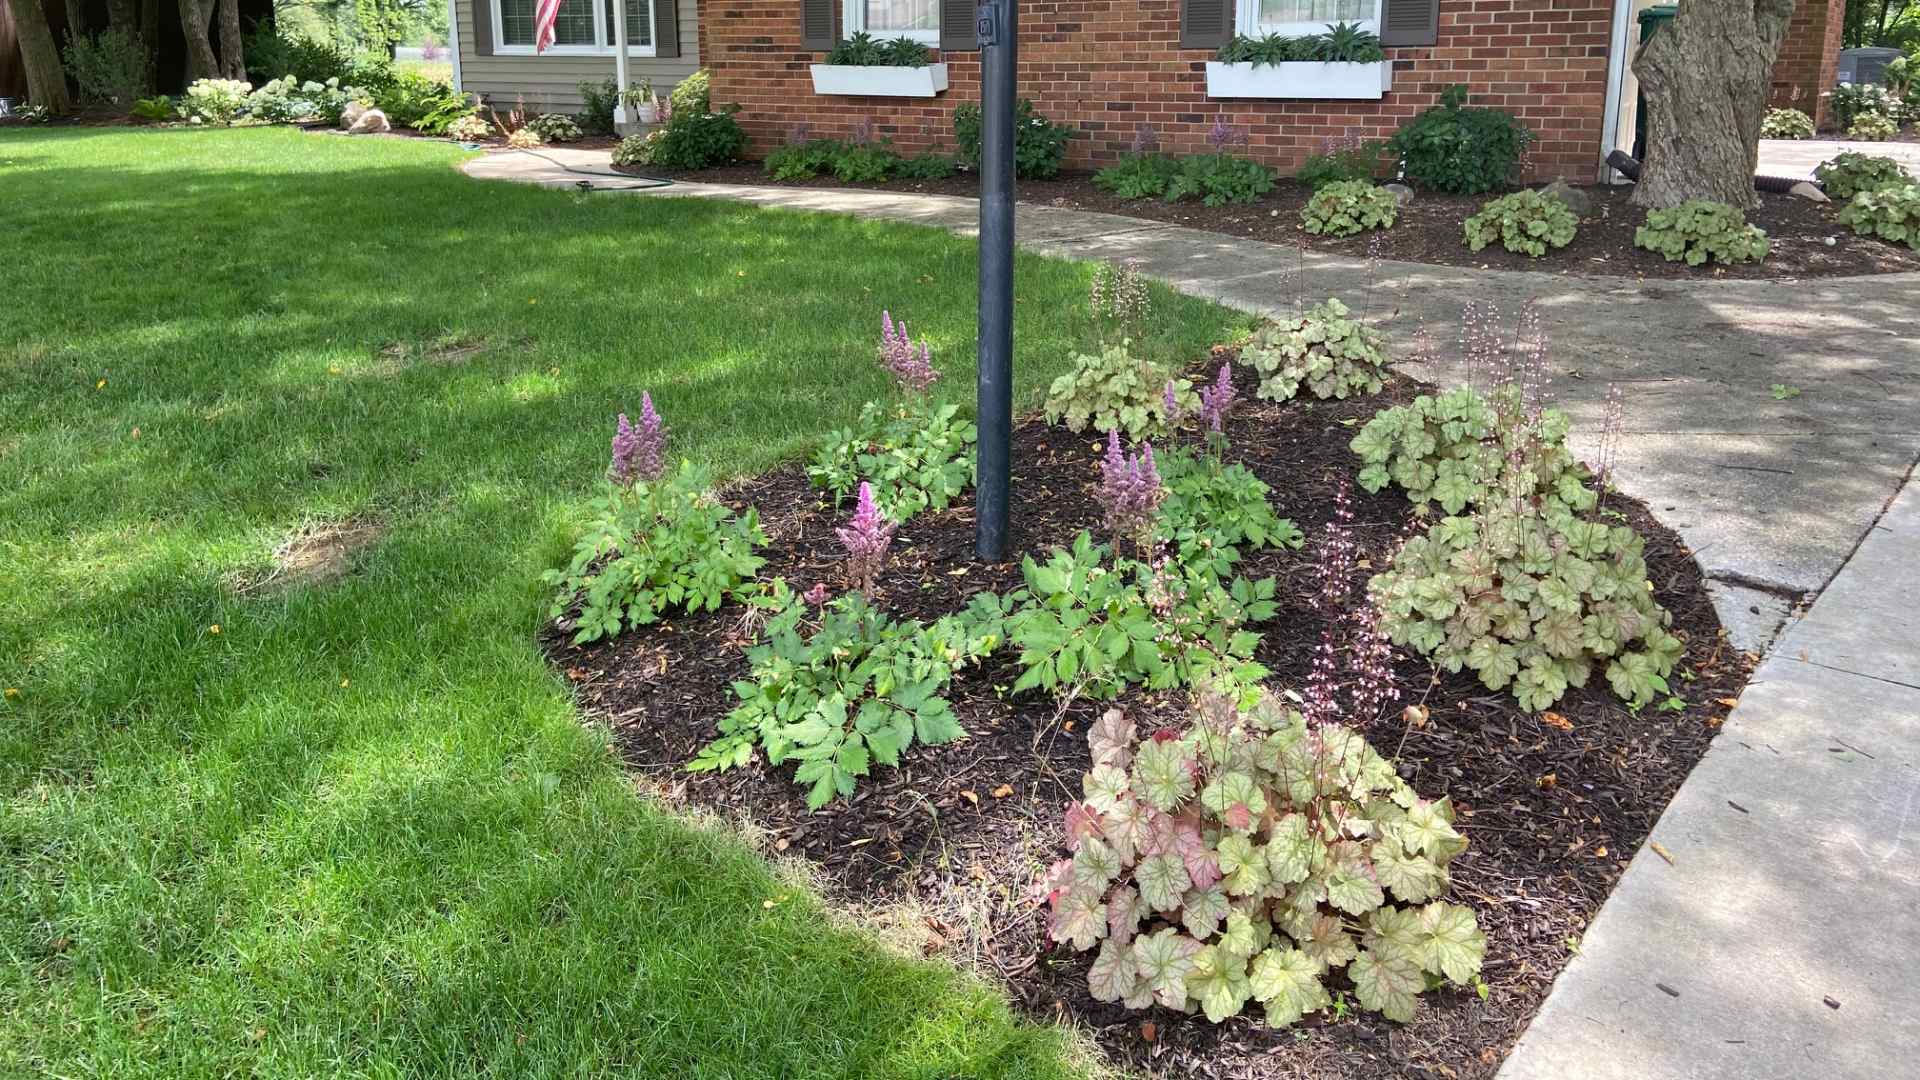 3 Easy Ways to Spruce up Your Landscape Beds This Spring